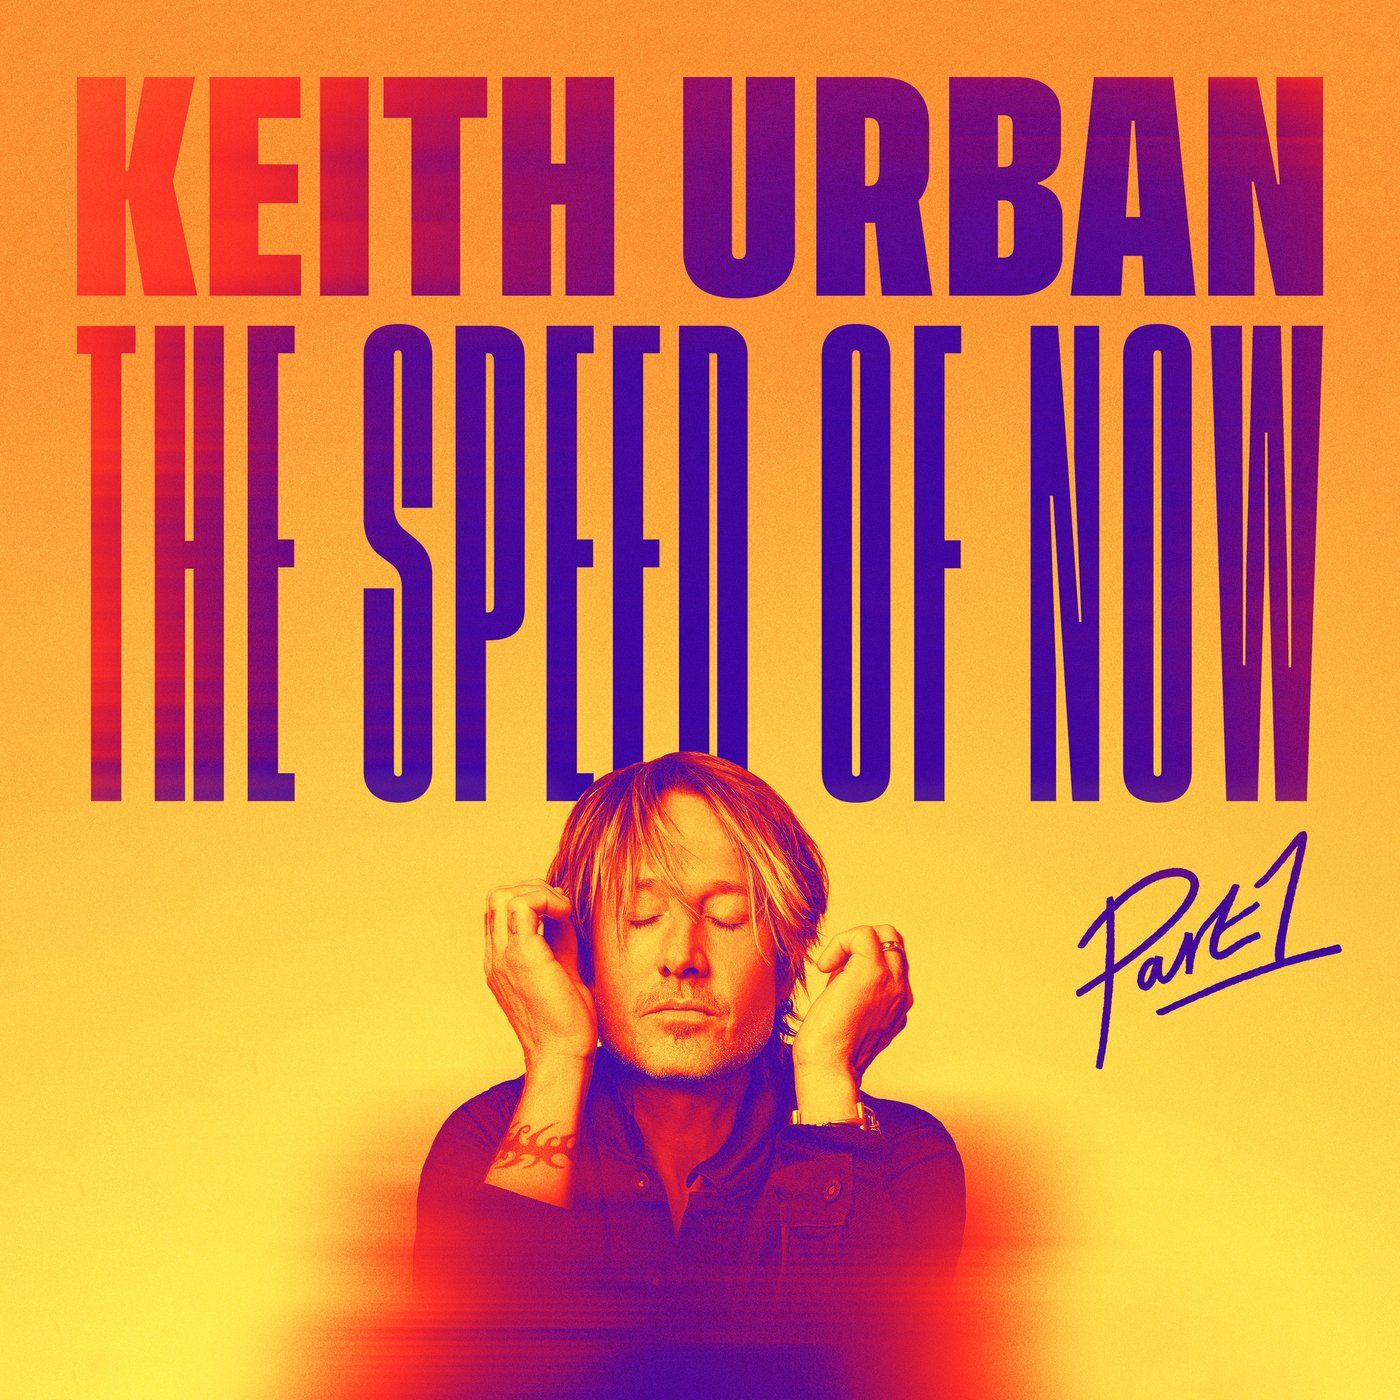 Keith Urban · The Speed Of Now Part 1 (2020 · FLAC+MP3)